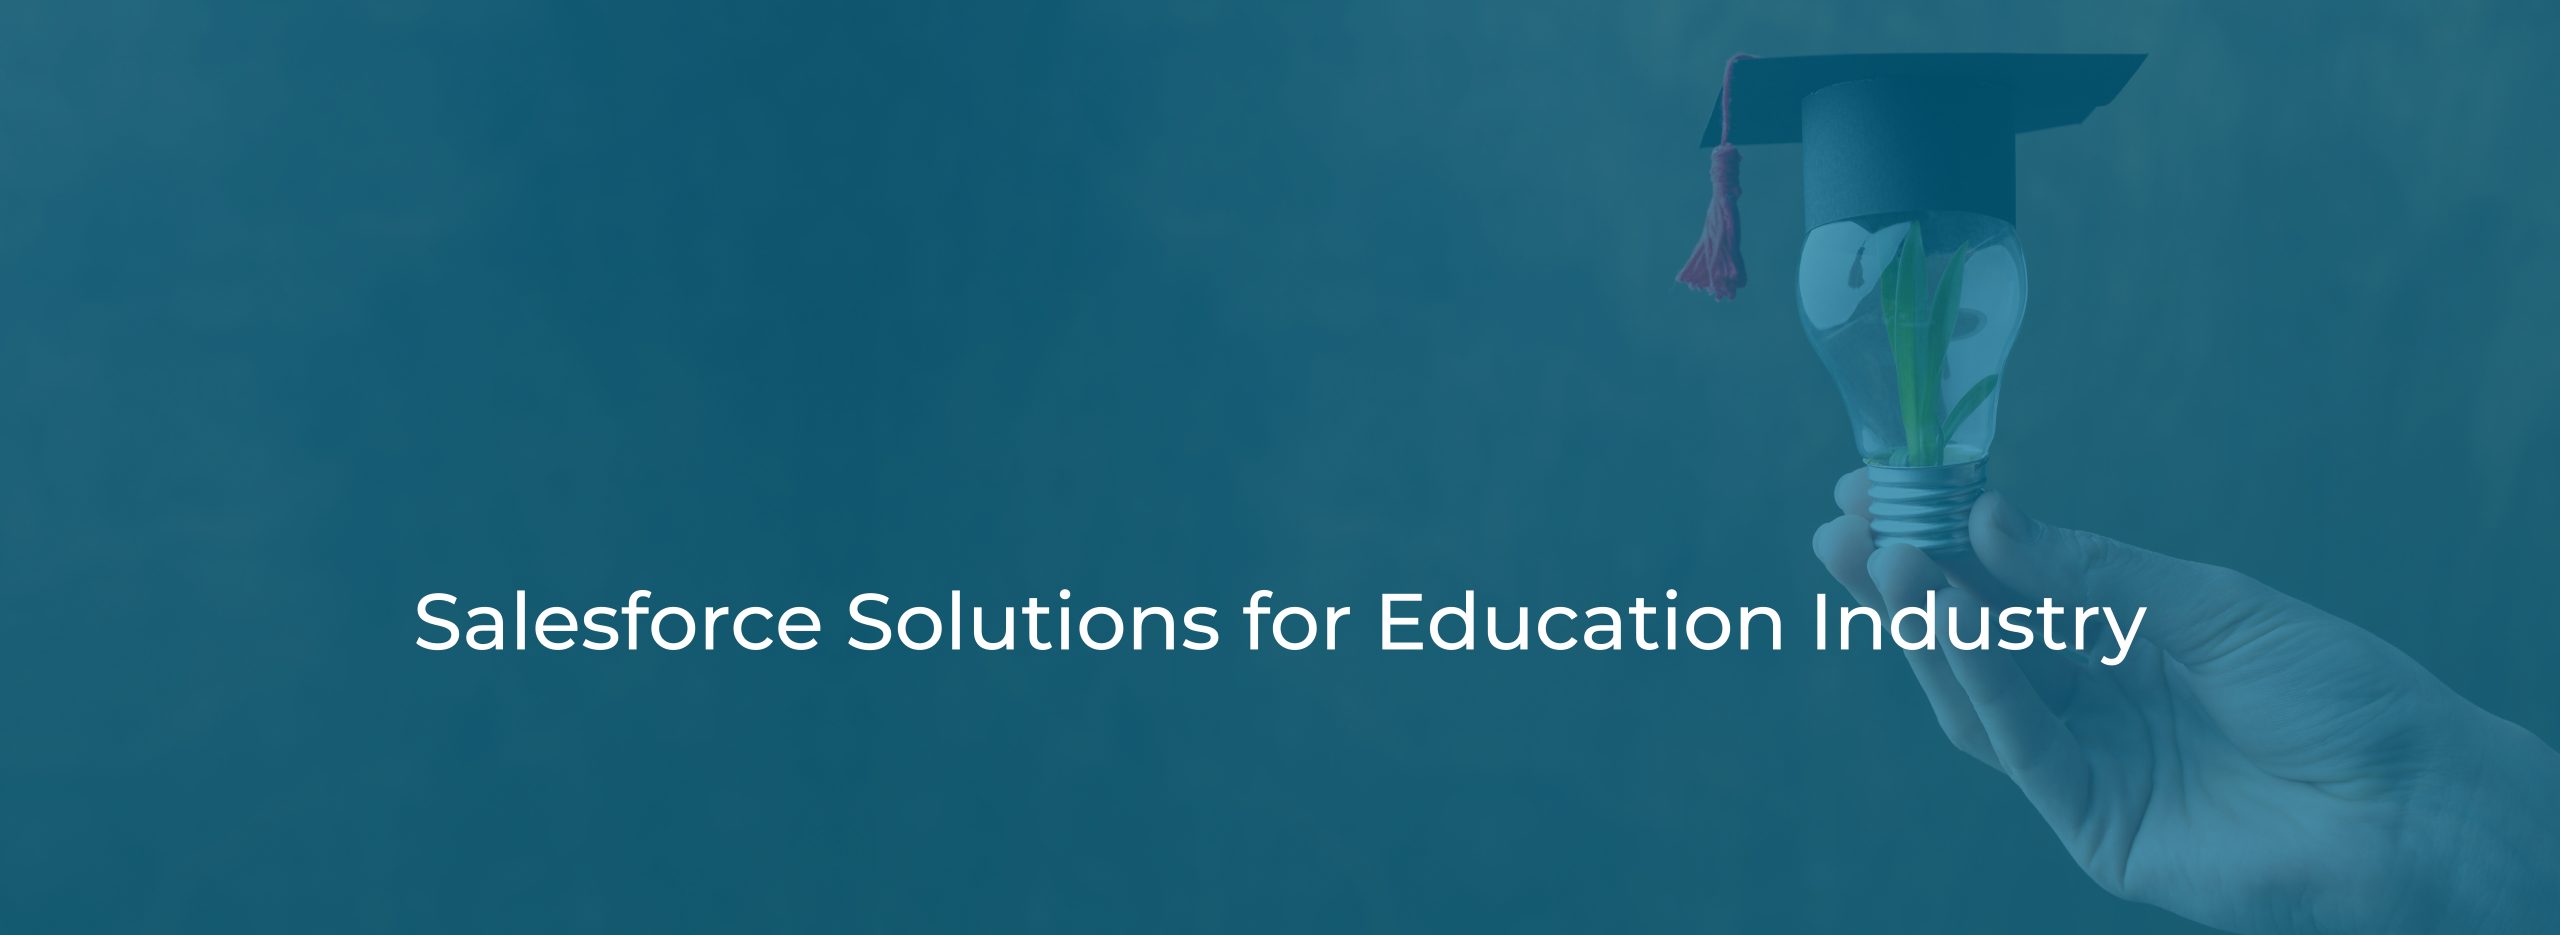 Salesforce Solutions for Education Industry